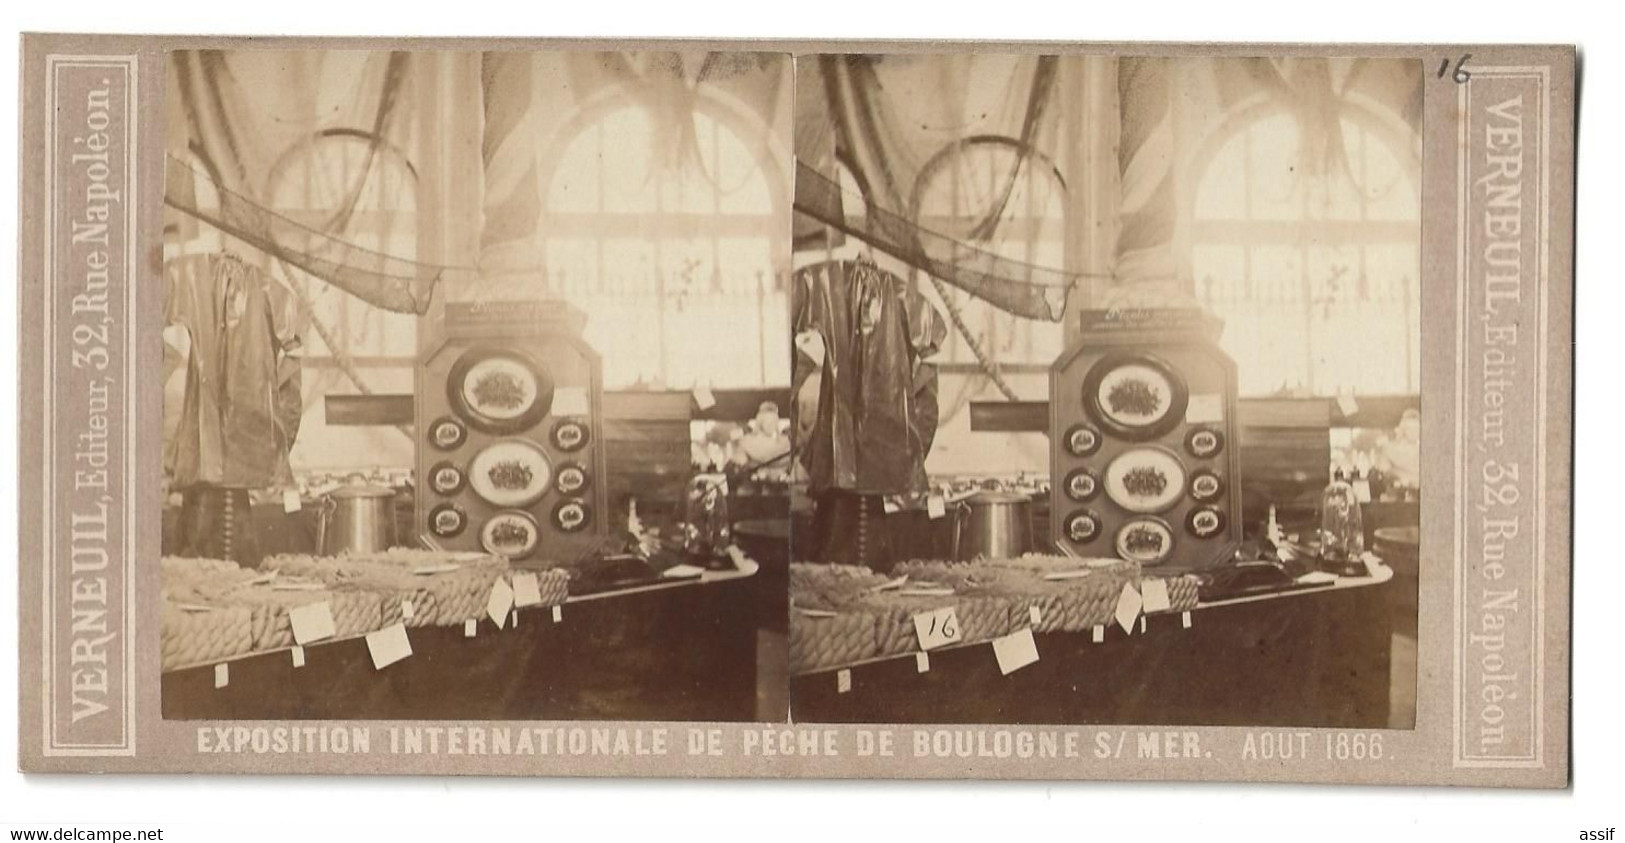 1866 BOULOGNE SUR MER EXPOSITION INTERNATIONALE DE PECHE PHOTO STEREO AUGUSTE VERNEUIL N°16 /FREE SHIPPING REGISTERED - Stereoscopic